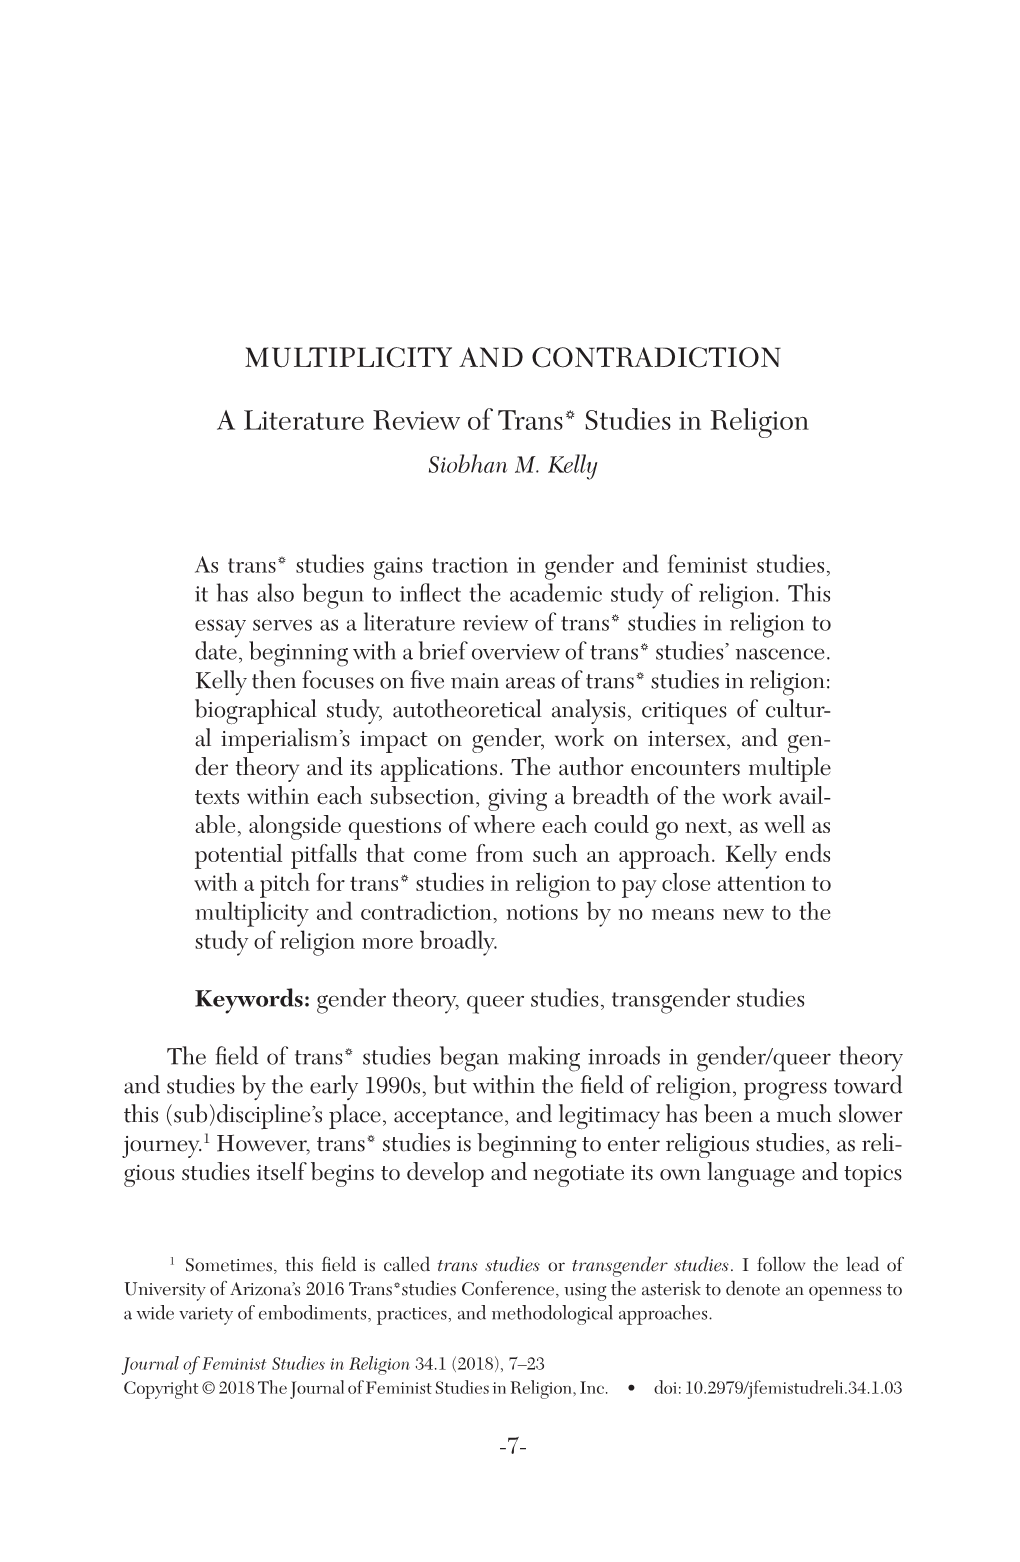 Multiplicity and Contradiction: a Literature Review of Trans* Studies